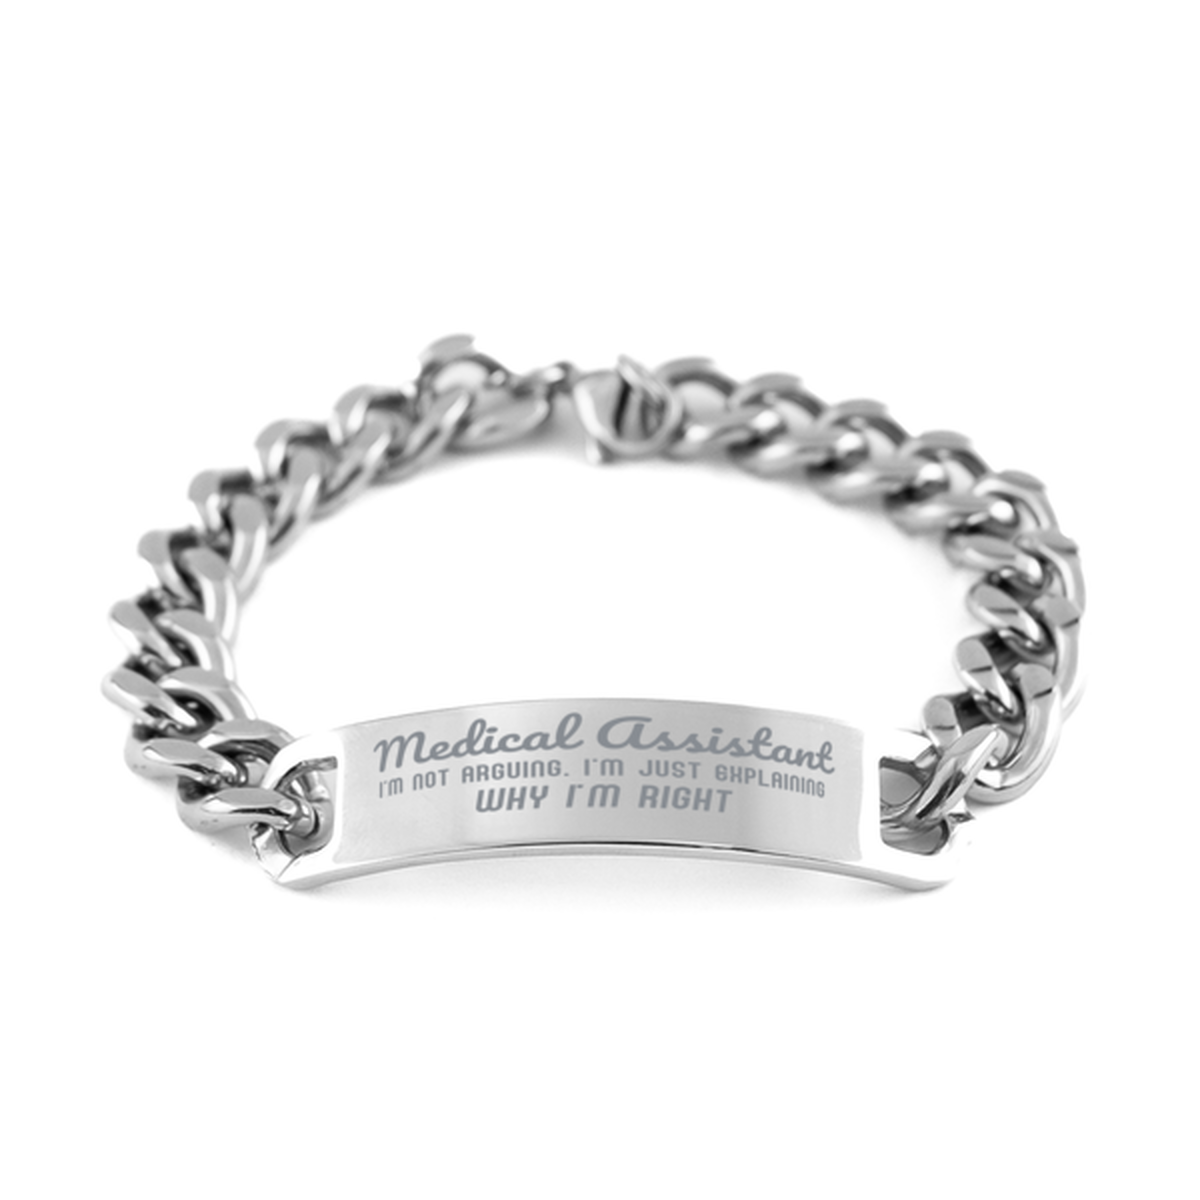 Medical Assistant I'm not Arguing. I'm Just Explaining Why I'm RIGHT Cuban Chain Stainless Steel Bracelet, Graduation Birthday Christmas Medical Assistant Gifts For Medical Assistant Funny Saying Quote Present for Men Women Coworker